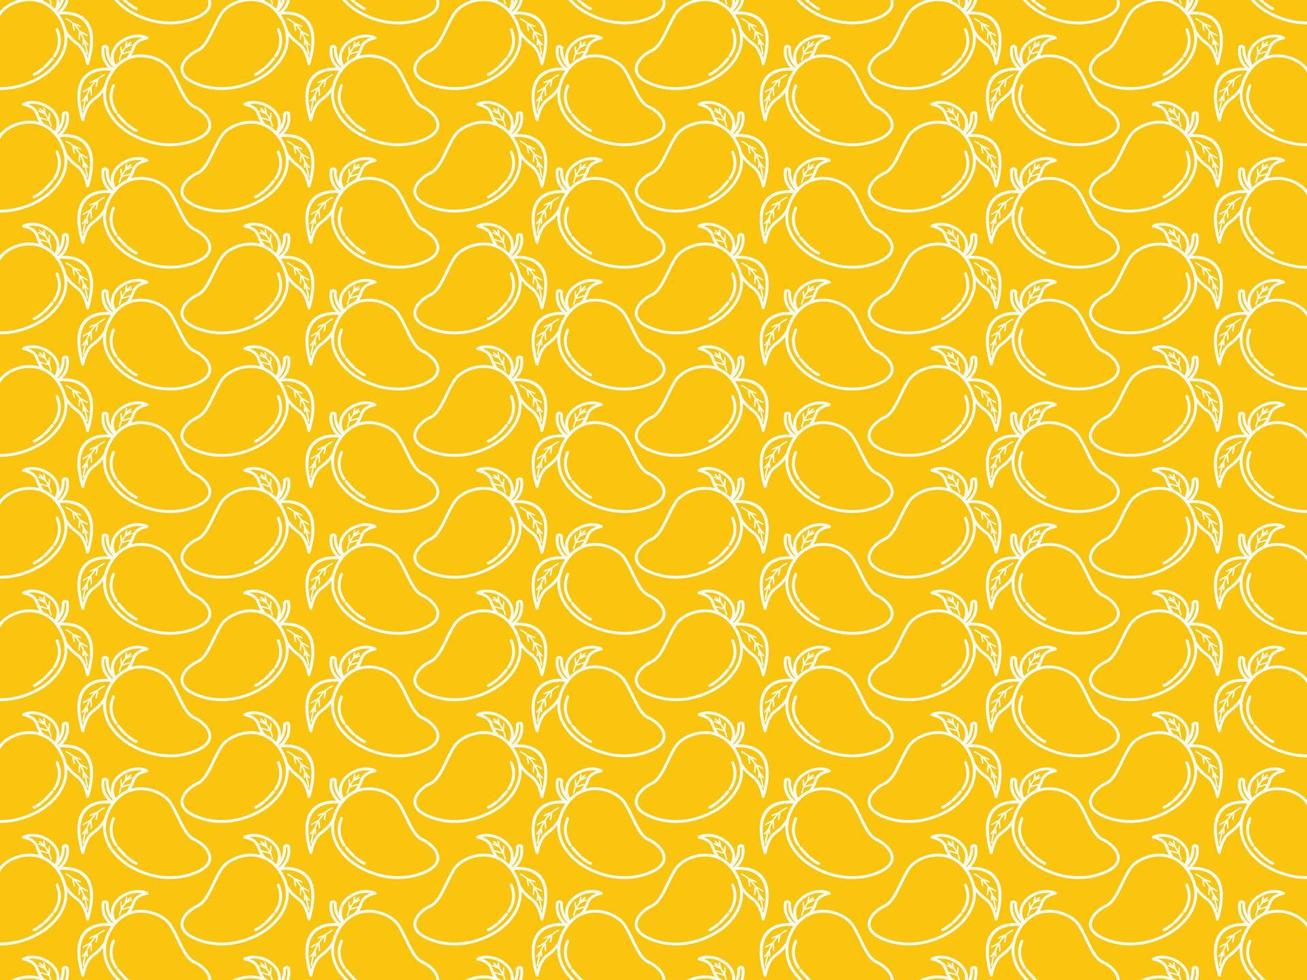 Mango with leaves seamless pattern, repeating fruit pattern flat design. It can be used for packaging, wrapping paper, greeting cards, stickers, fabric, and prints. vector